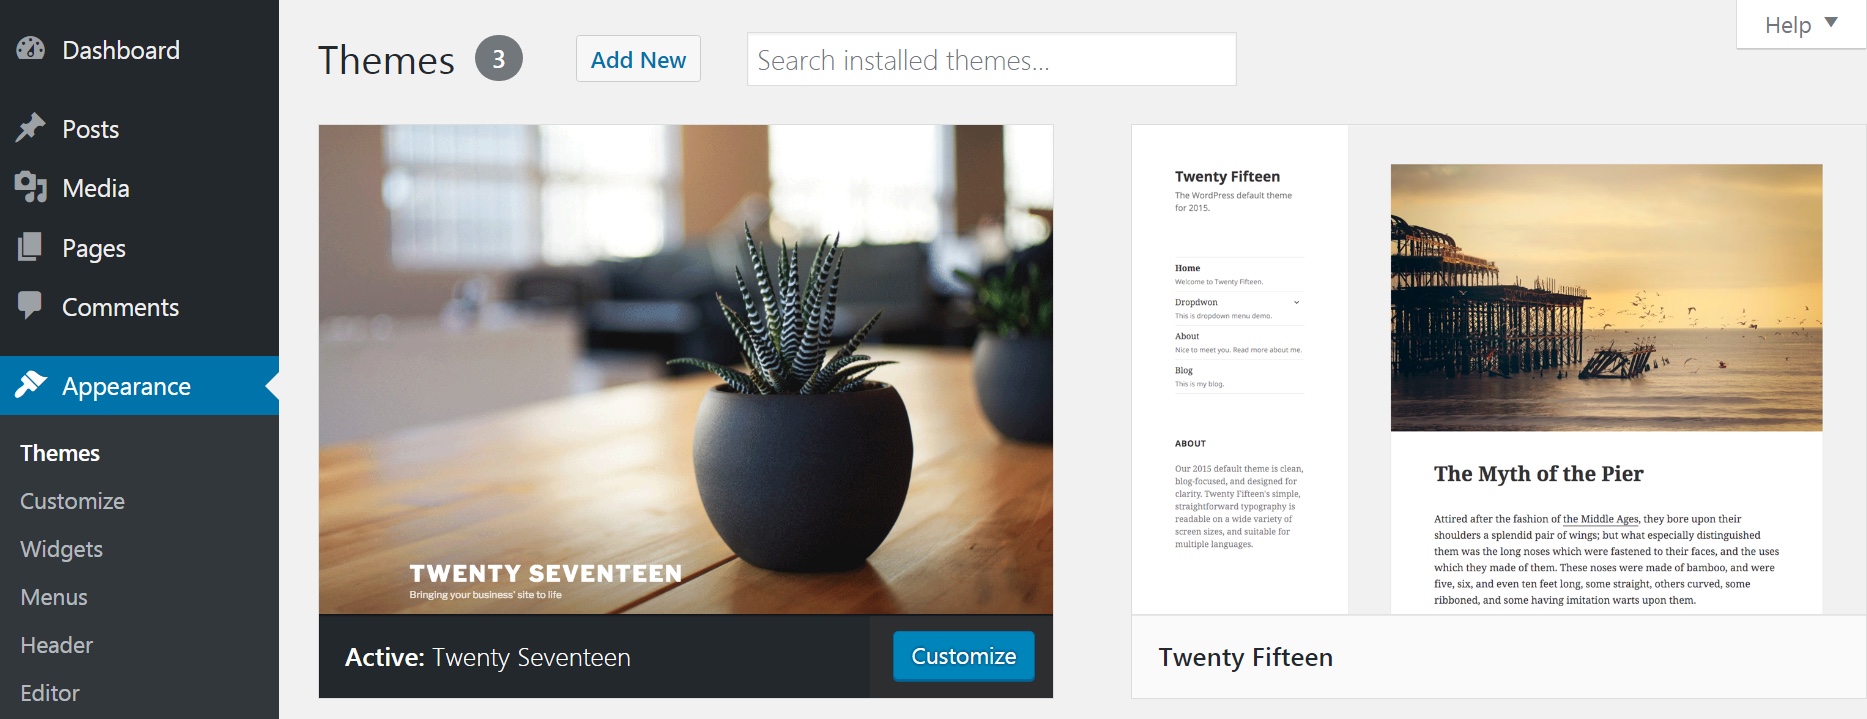 The Themes section of the WordPress back end.